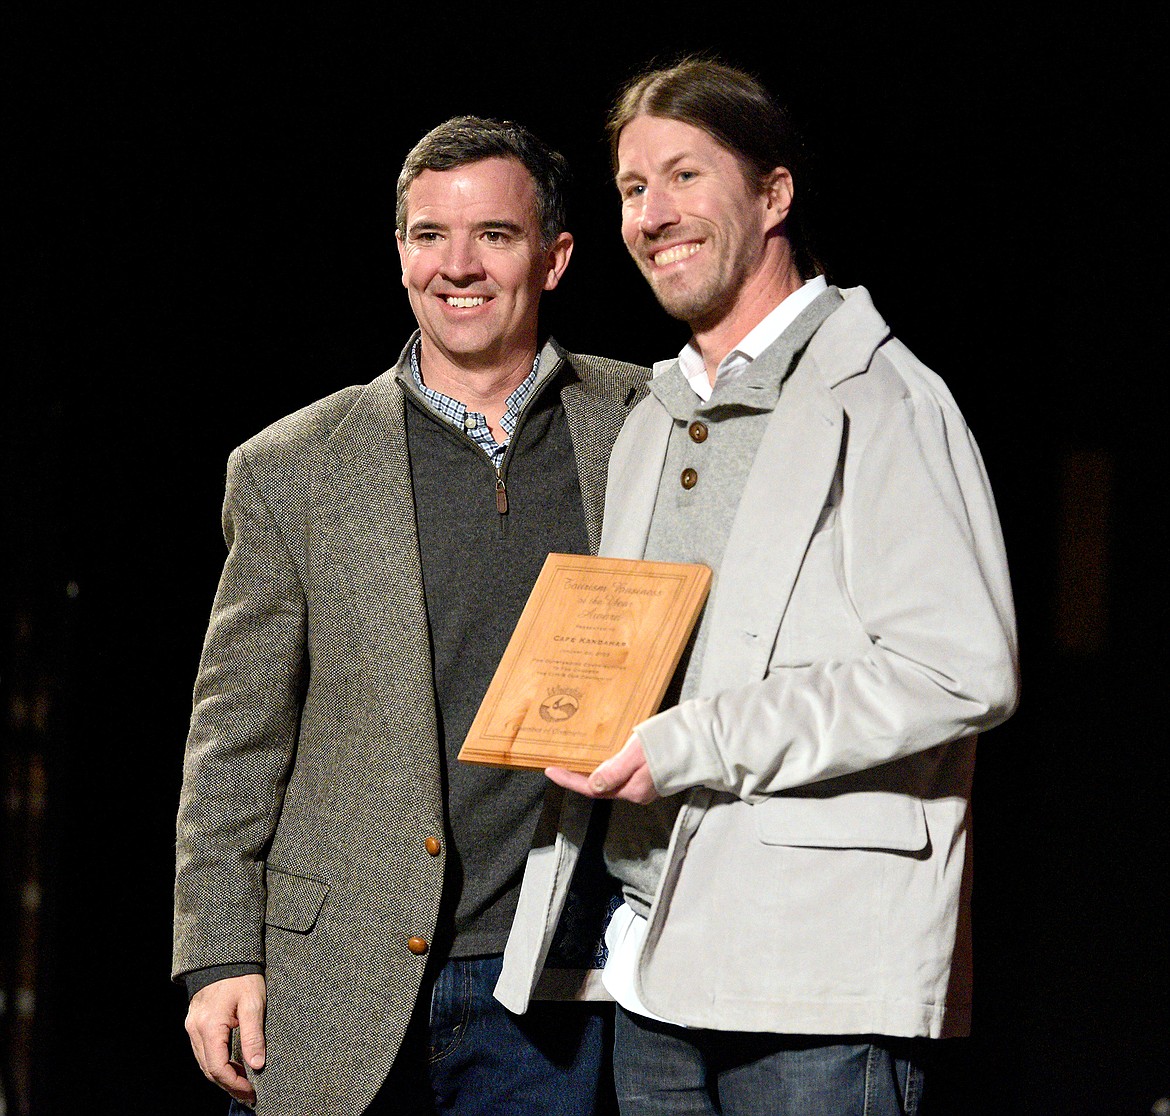 Cafe Kandahar head chef and owner Andy Blanton accepts the Tourism Business of the Year award presented by Whitefish Mountain Resort president Nick Polumbus at the Whitefish Chamber Awards Gala Thursday. (Whitney England/Whitefish Pilot)